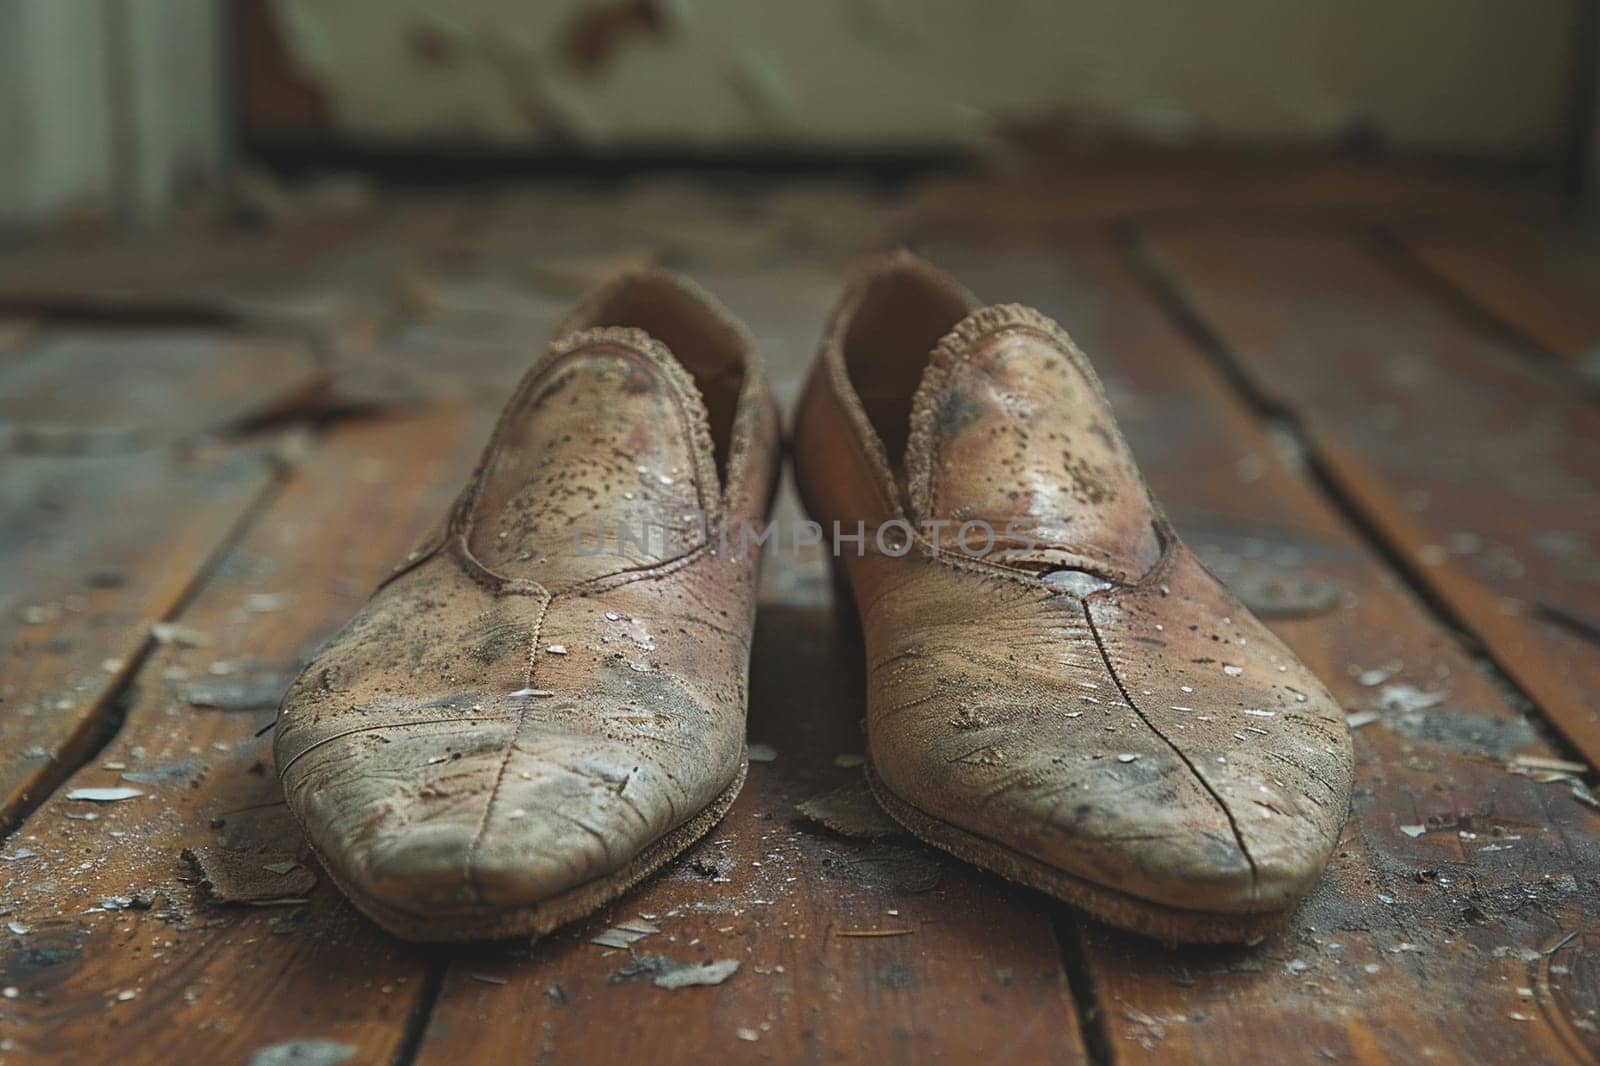 Worn Ballet Slippers on a Vintage Wooden Floor, The soft leather blurs against the grain, stories of rehearsals whispered with every step.